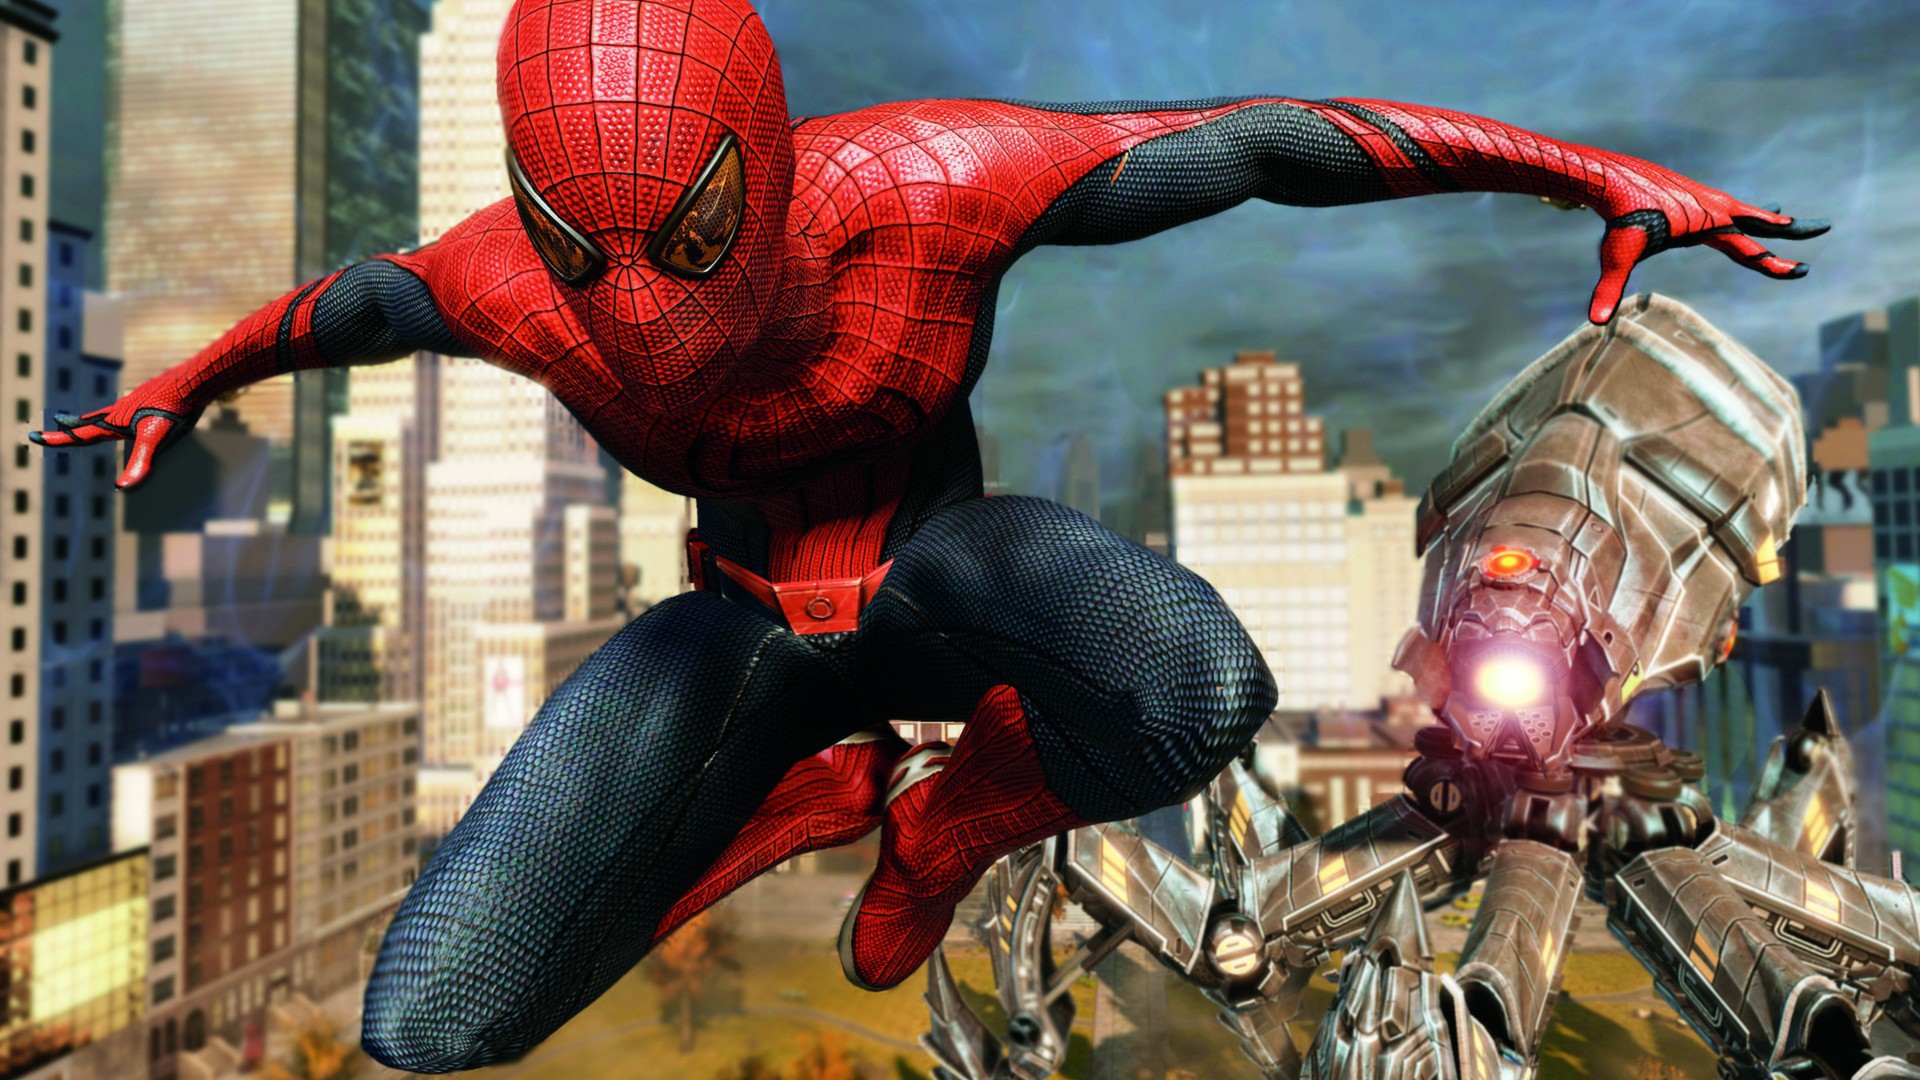 the amazing spider man 1 game download pc